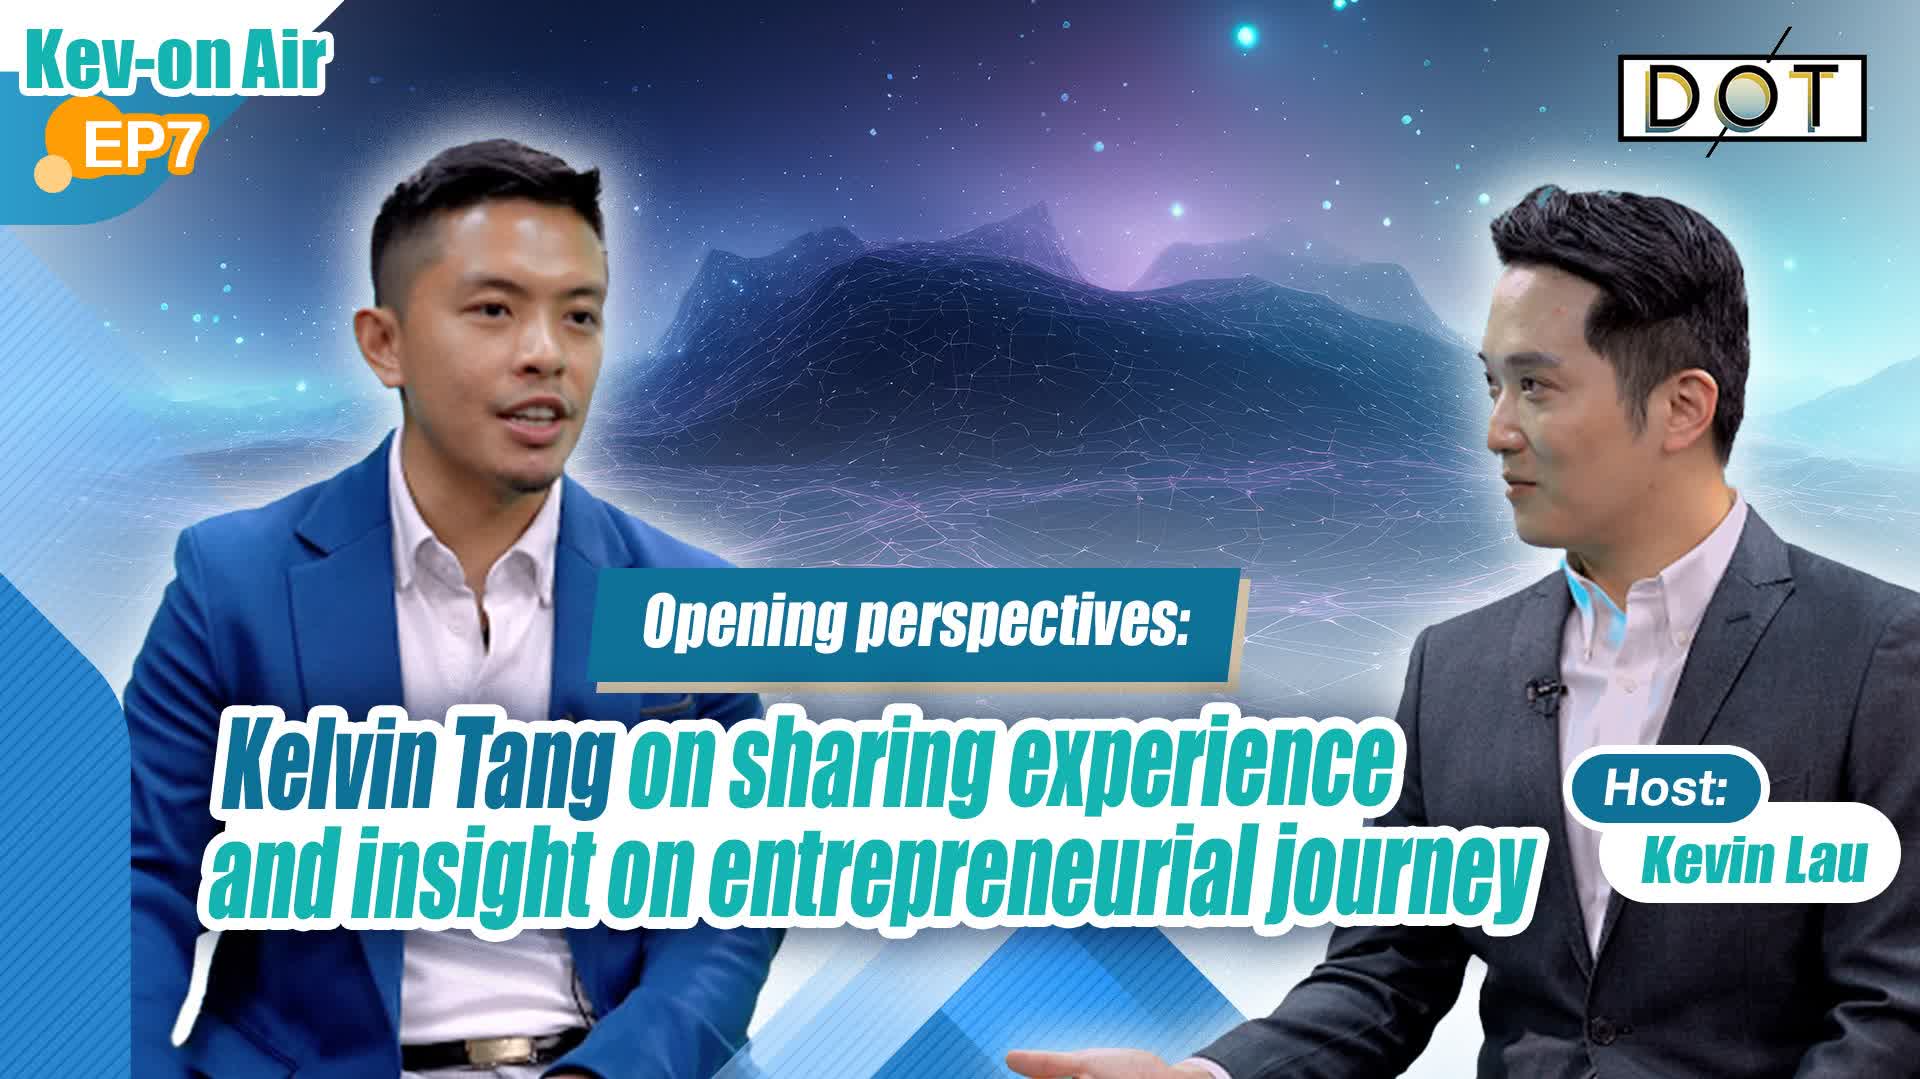 Kev-On Air EP7 | Opening perspectives: Kelvin Tang on sharing experience and insight on entrepreneurial journey